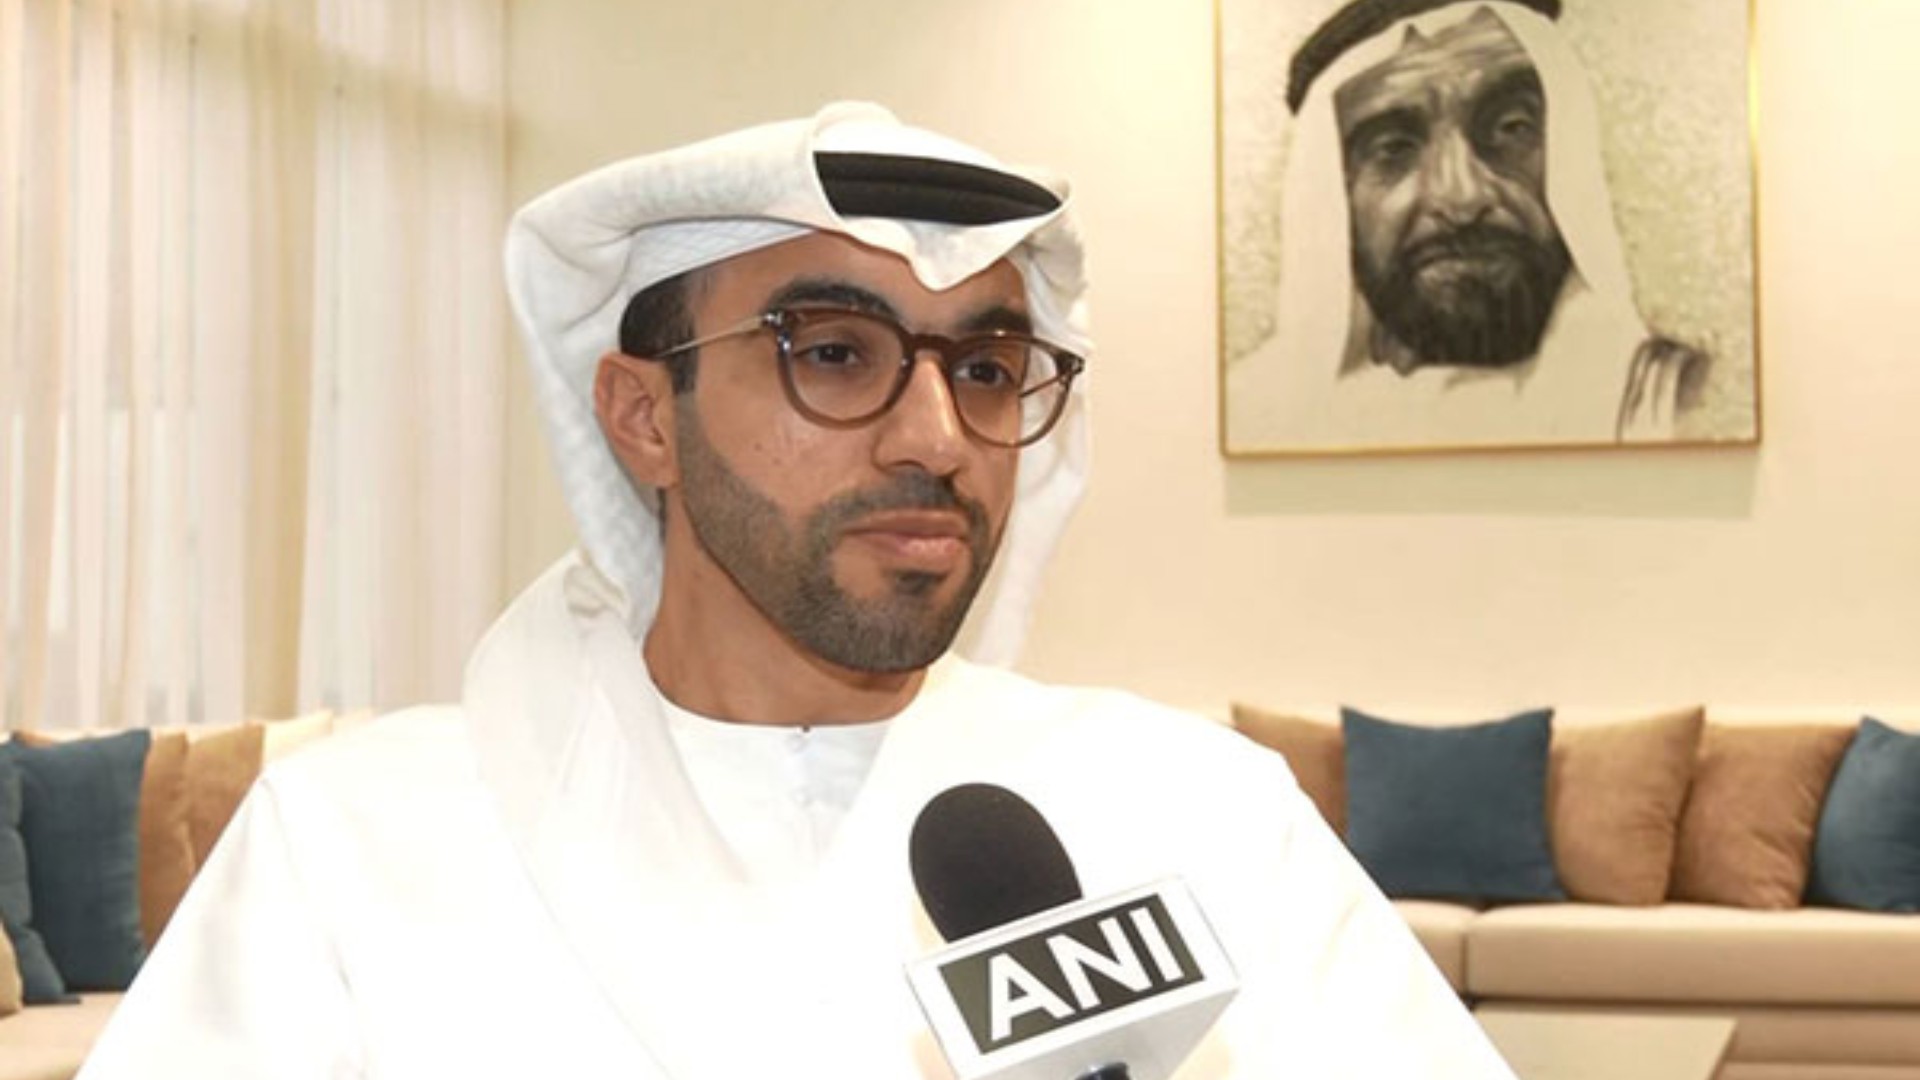 PM Modi's 2015 visit was 'turning point' for ties, says UAE envoy to India